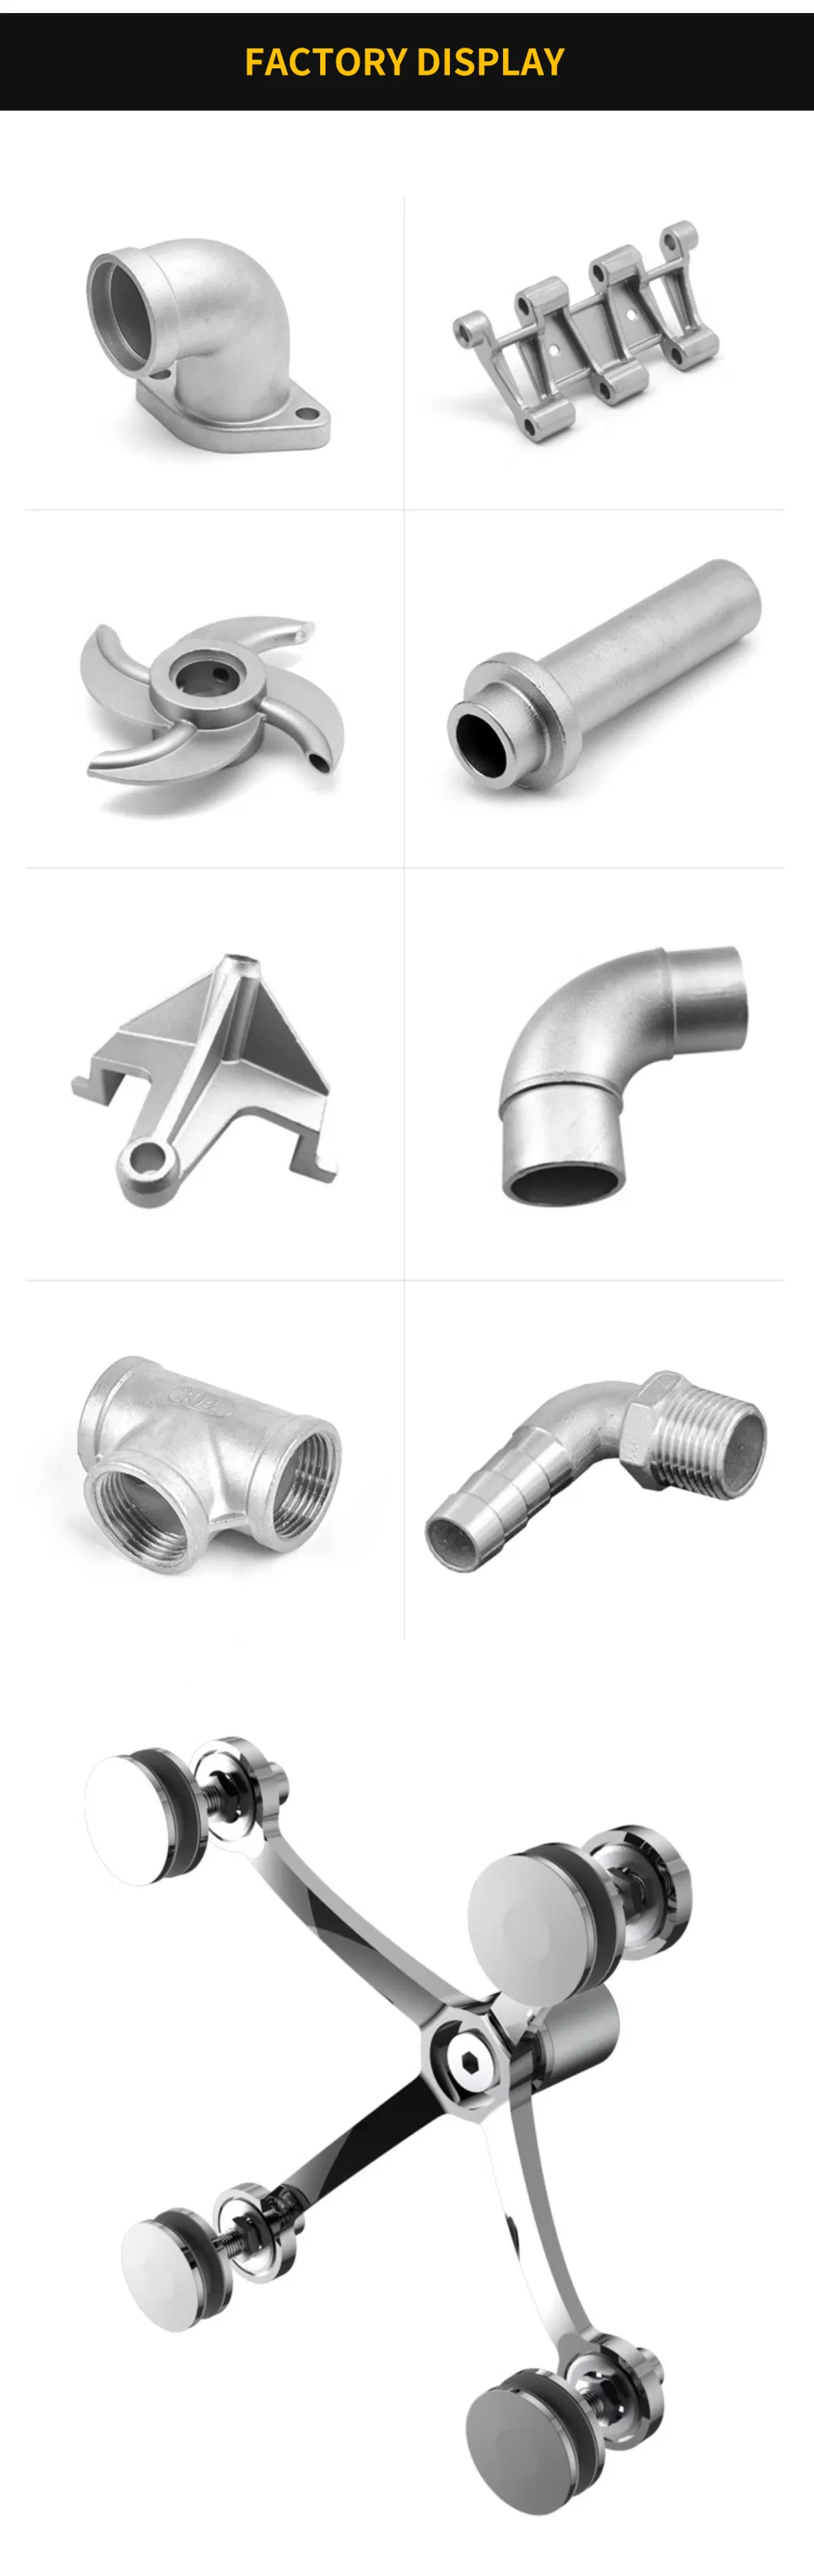 OEM Precision Casting 304 316 Stainless Steel Carbon Steel Investment Casting Lost Wax Casting